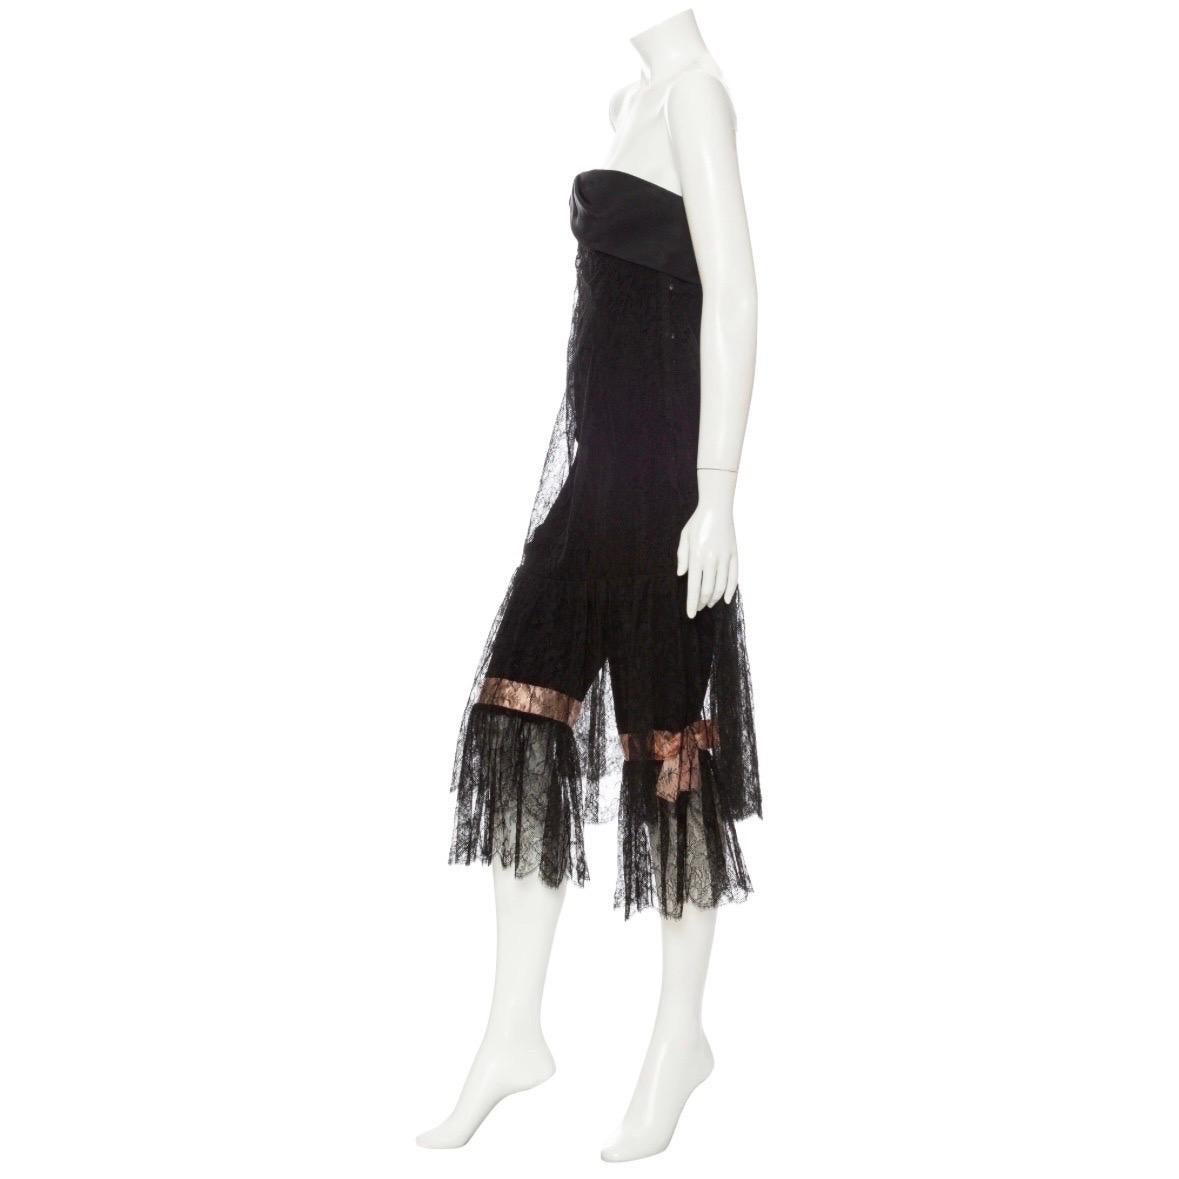 Balenciaga 1967 Haute Couture Black Chantilly Lace Pantalettes Dress In Good Condition For Sale In Los Angeles, CA